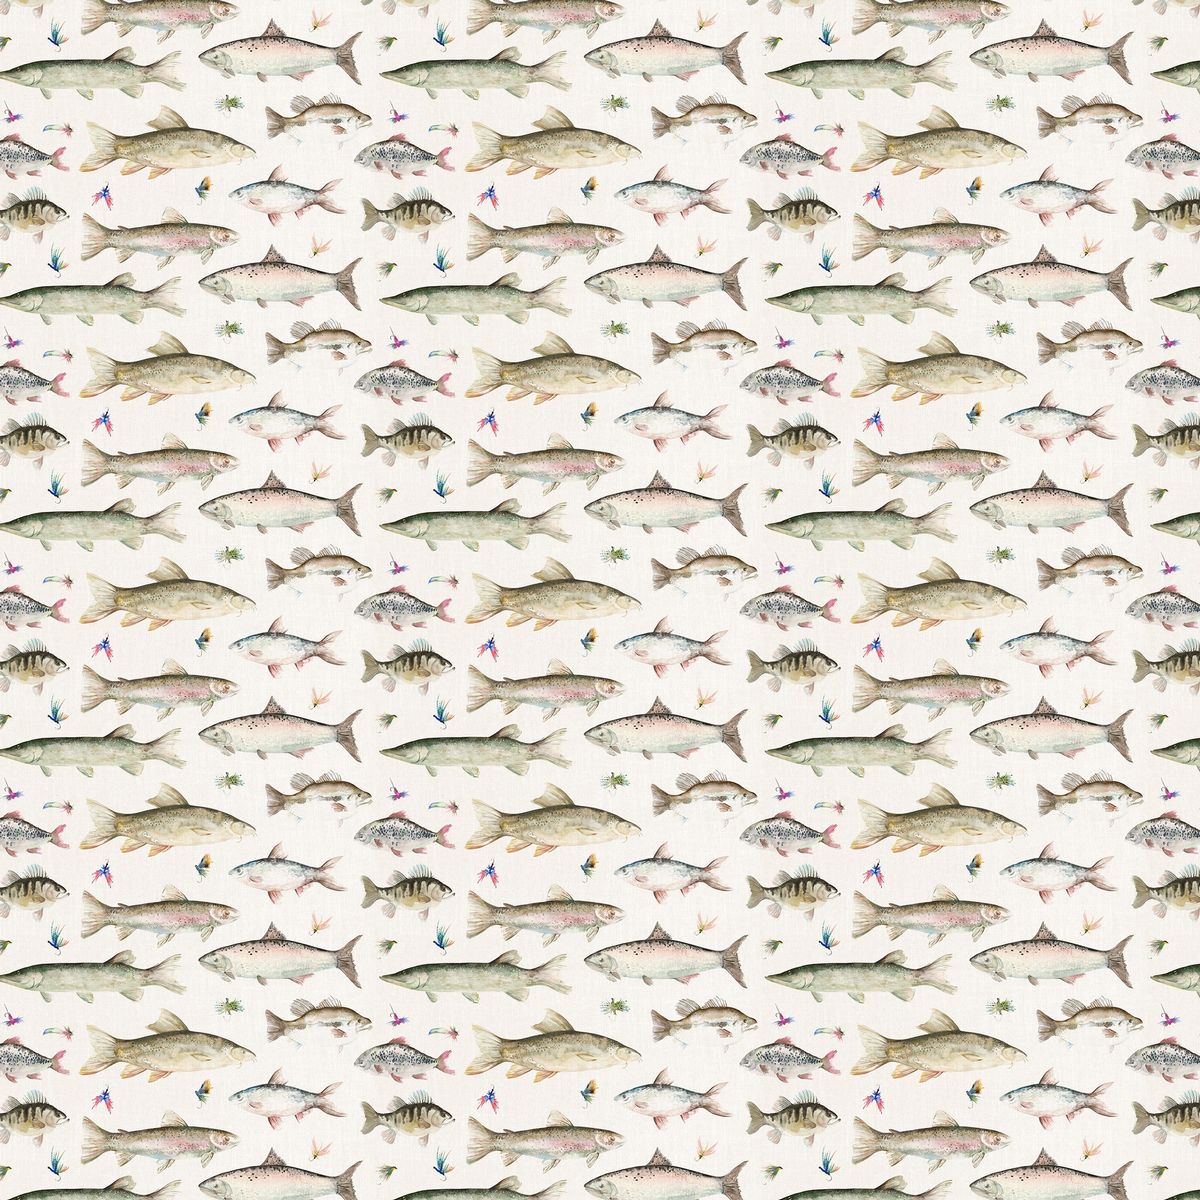 River Fish Linen Fabric by Voyage Maison